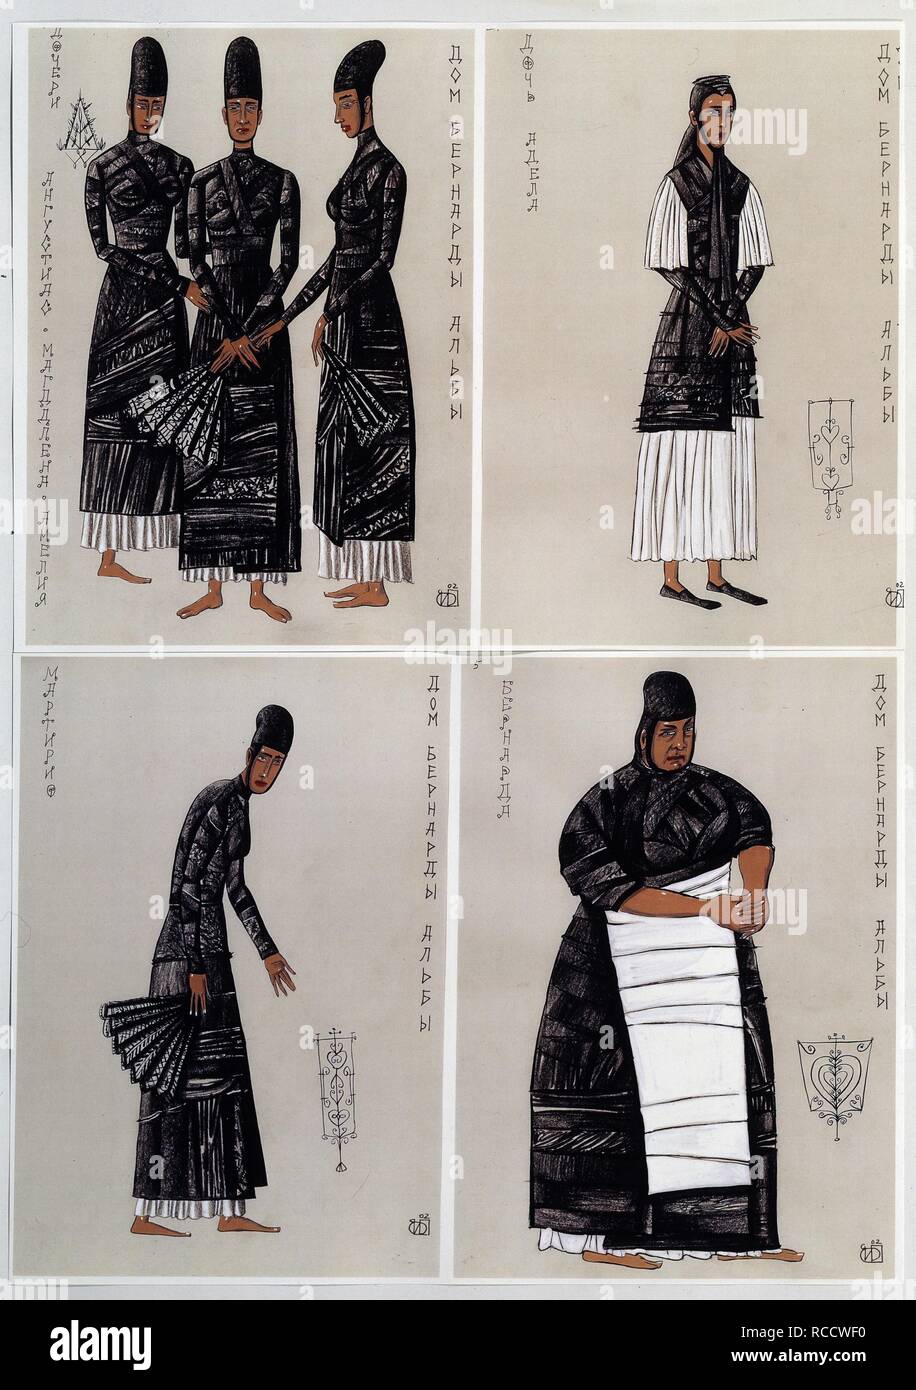 Costume design for the play The House of Bernarda Alba by F. García Lorca.  Museum: State Museum-and exhibition Centre ROSIZO, Moscow. Author: Dolgova,  Irina Vyacheslavovna Stock Photo - Alamy